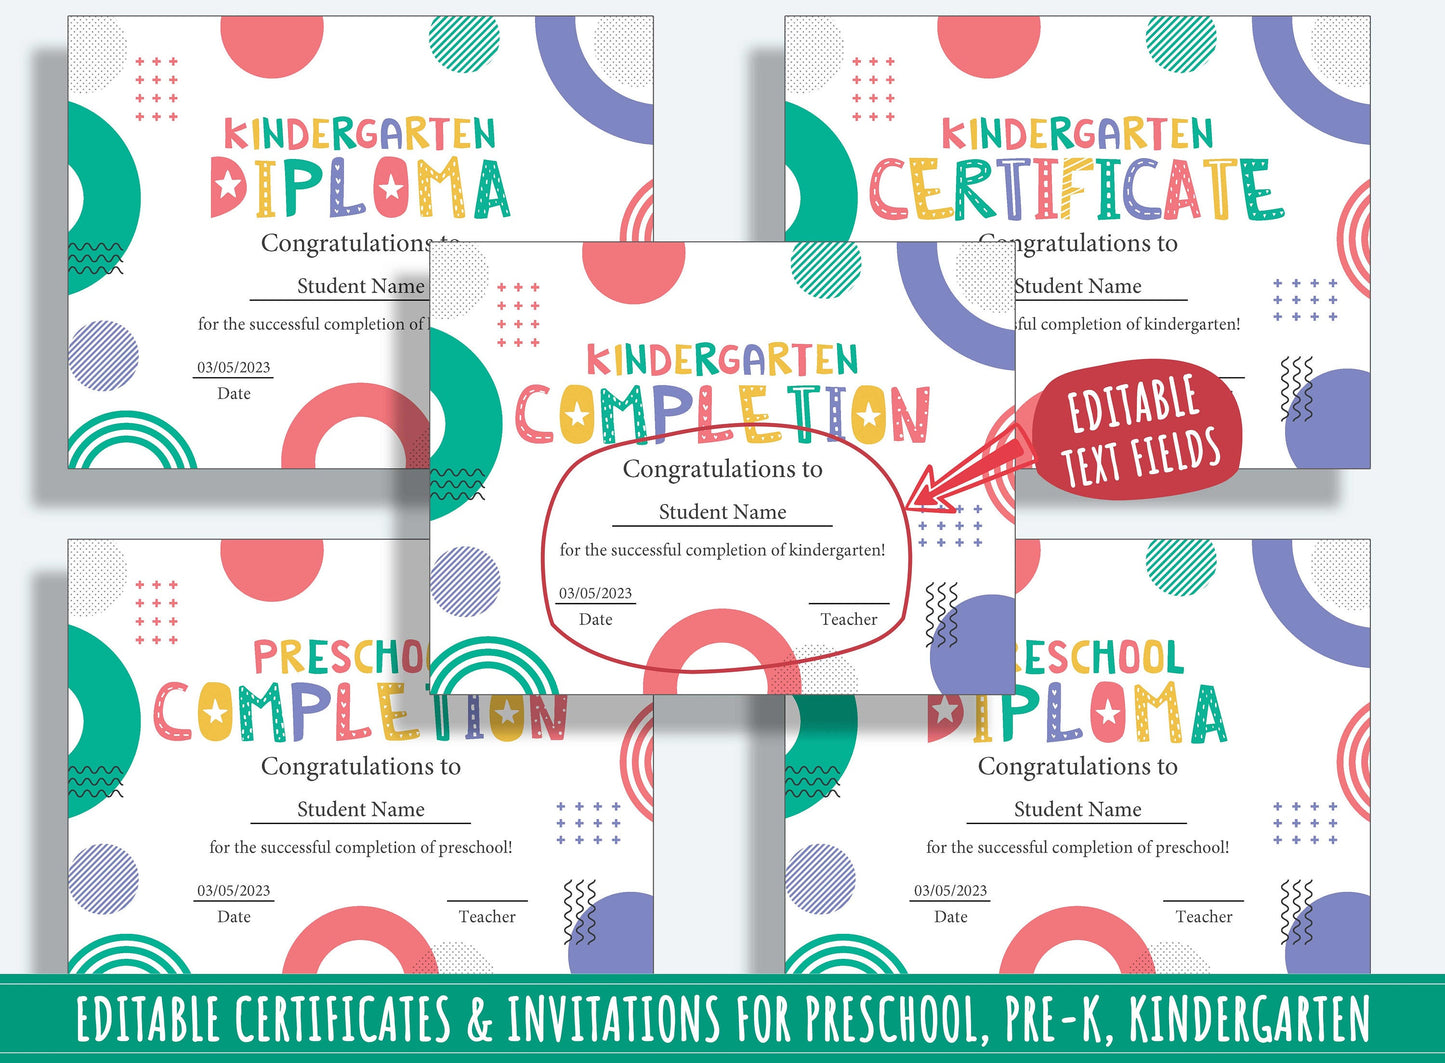 Student Council Certificate, Editable End of Year Diplomas, Certificates, and Invitations for PreK and K, PDF File, Instant Download